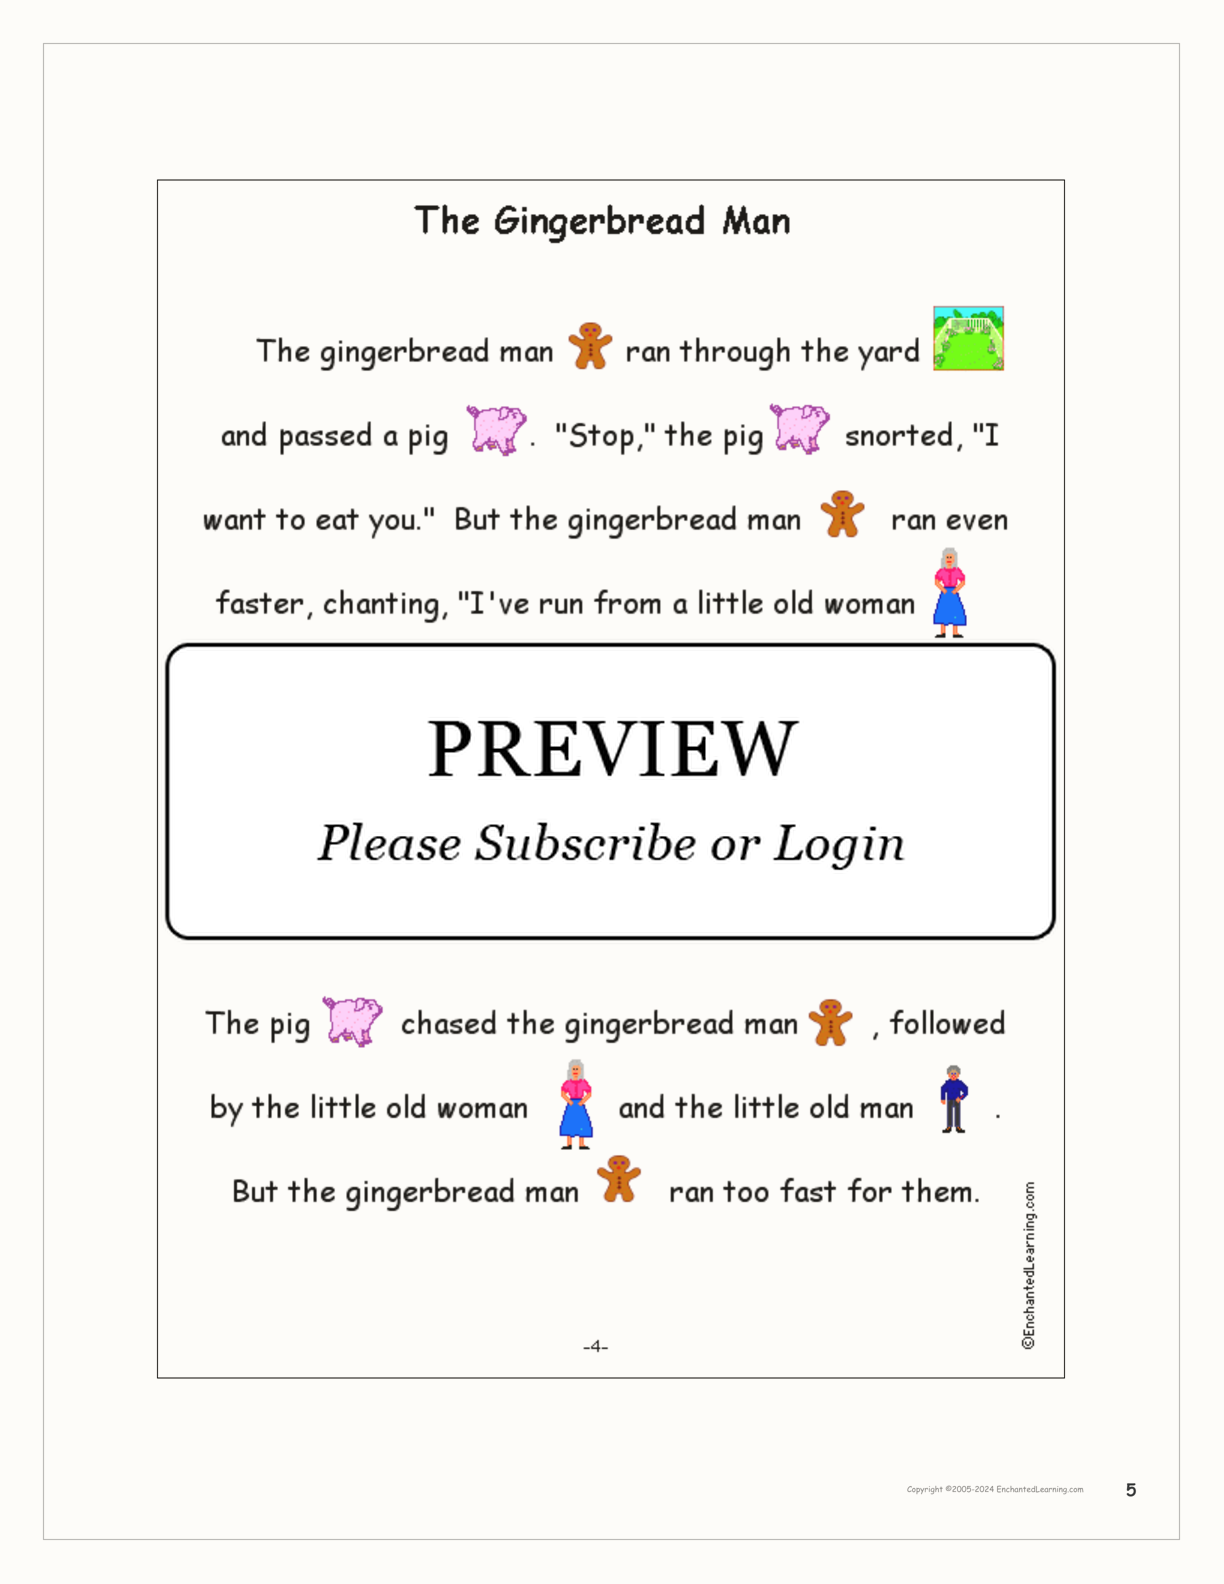 'The Gingerbread Man' Book interactive printout page 5